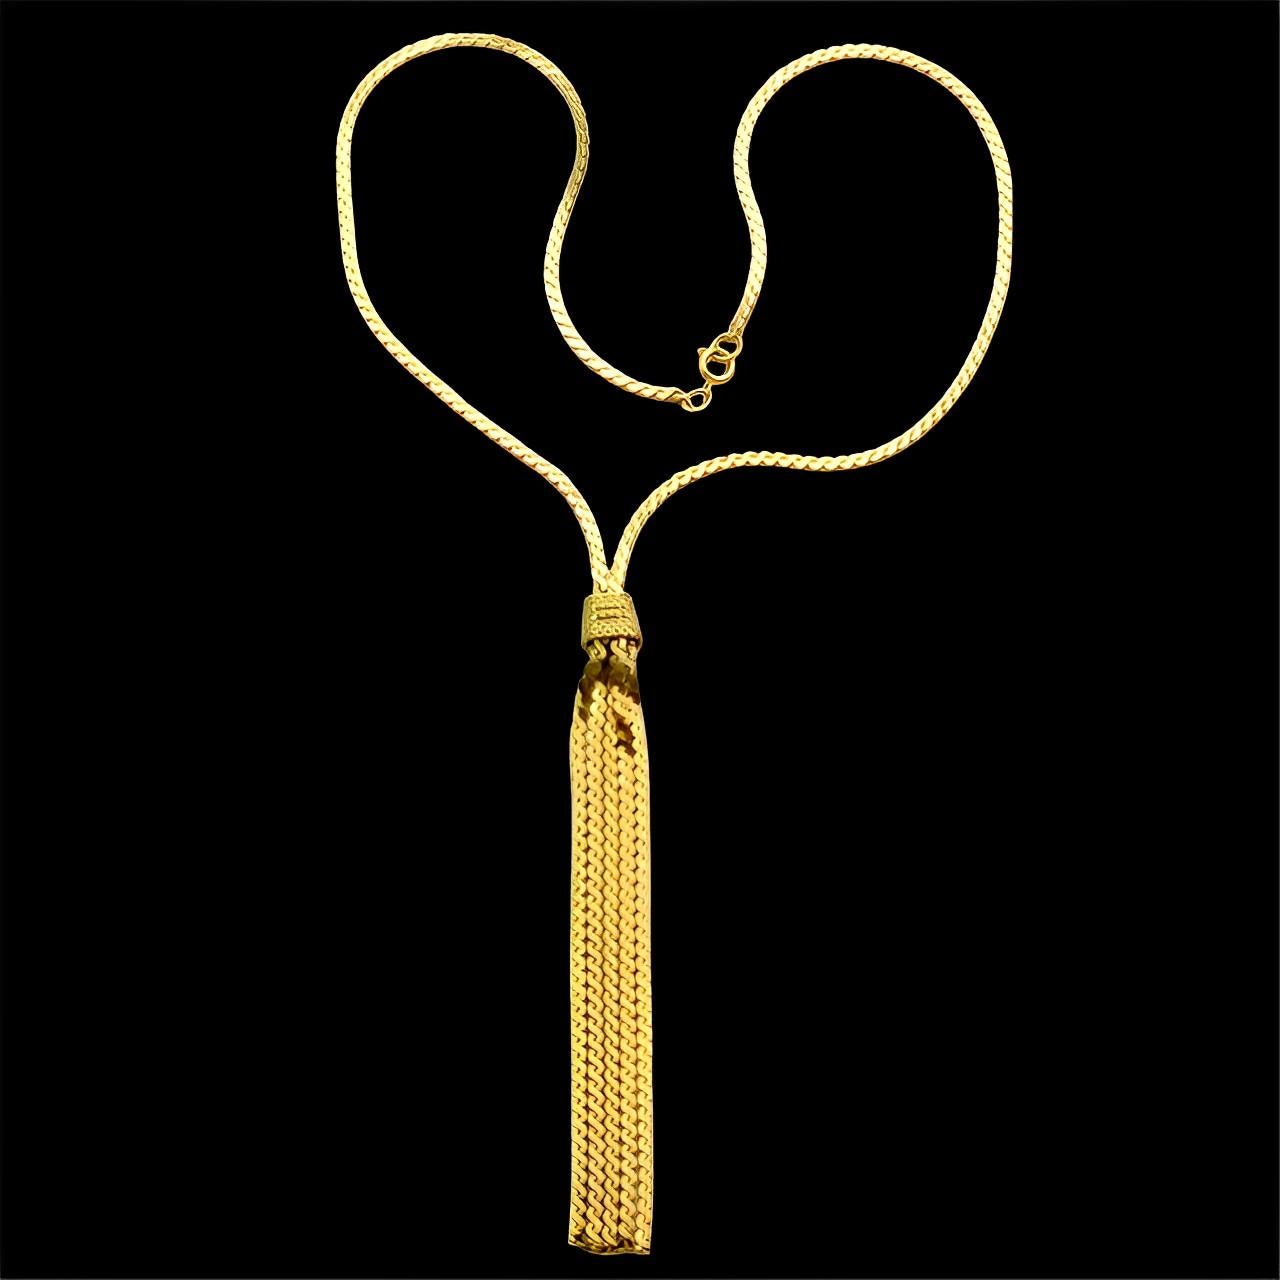 Gold Plated Plaited Serpentine Chain Tassel Necklace circa 1980s For Sale 2